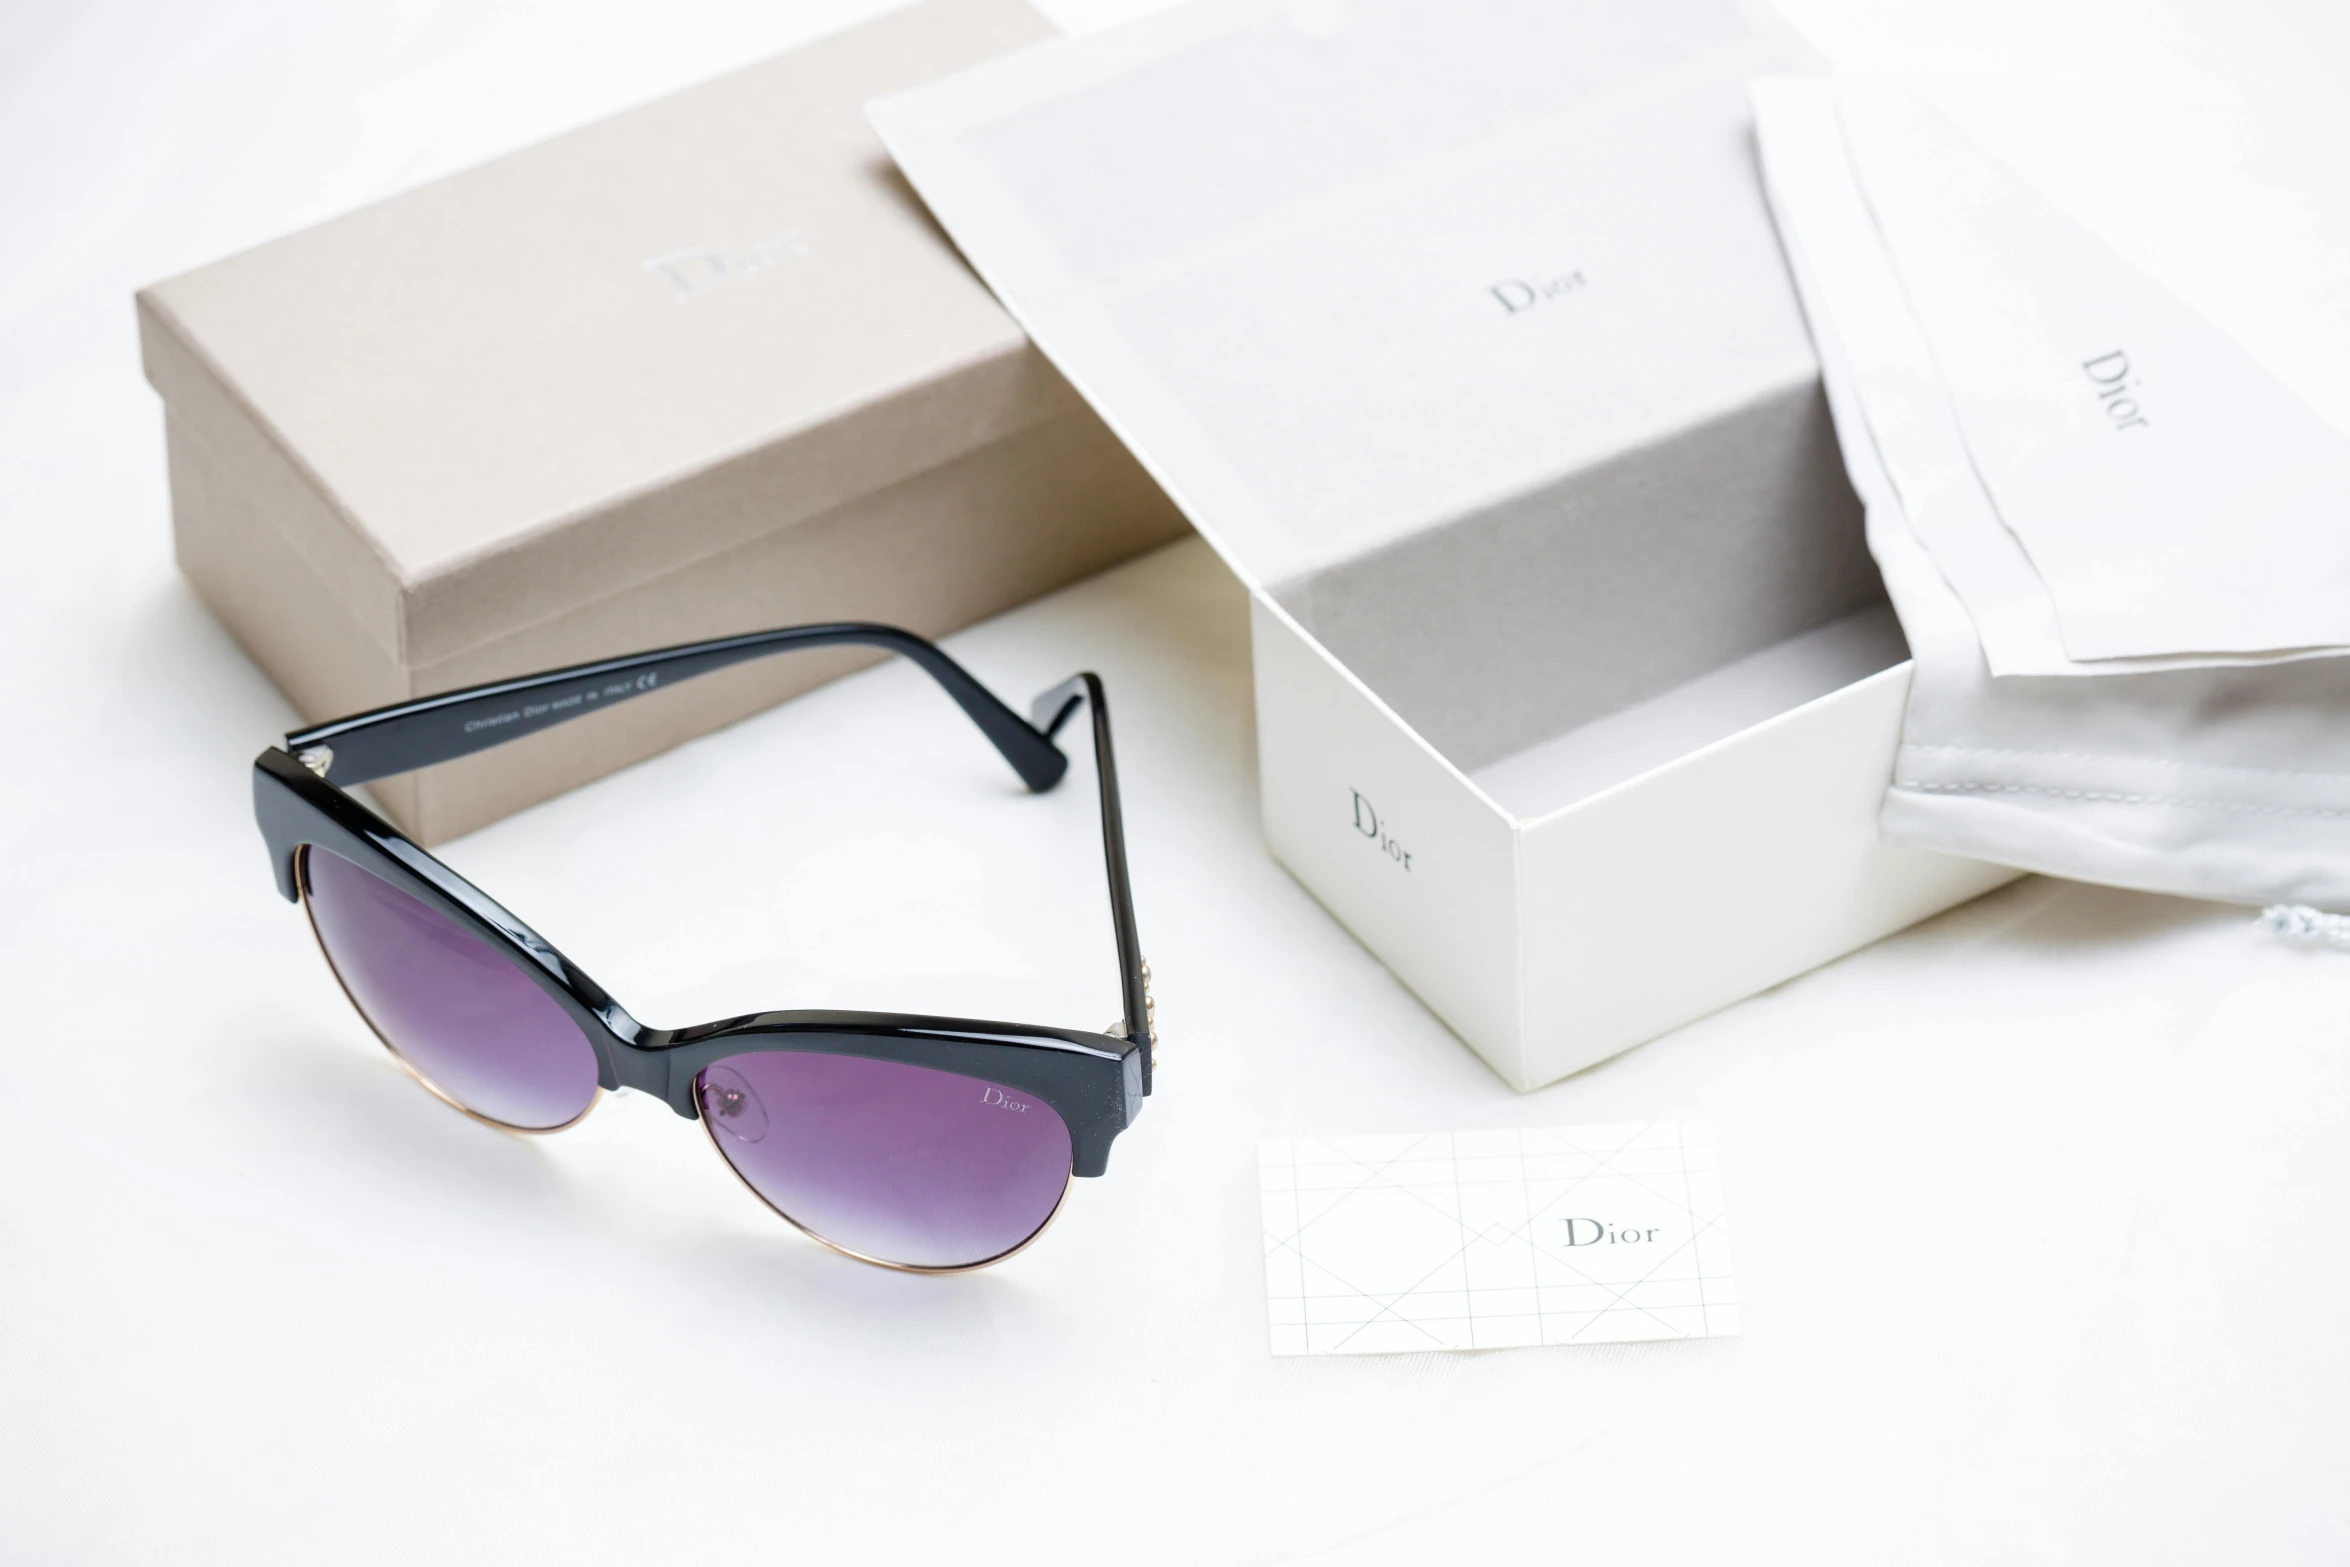 a pair of sunglasses sitting next to a box, dada, dior, ((purple)), thumbnail, lot of details